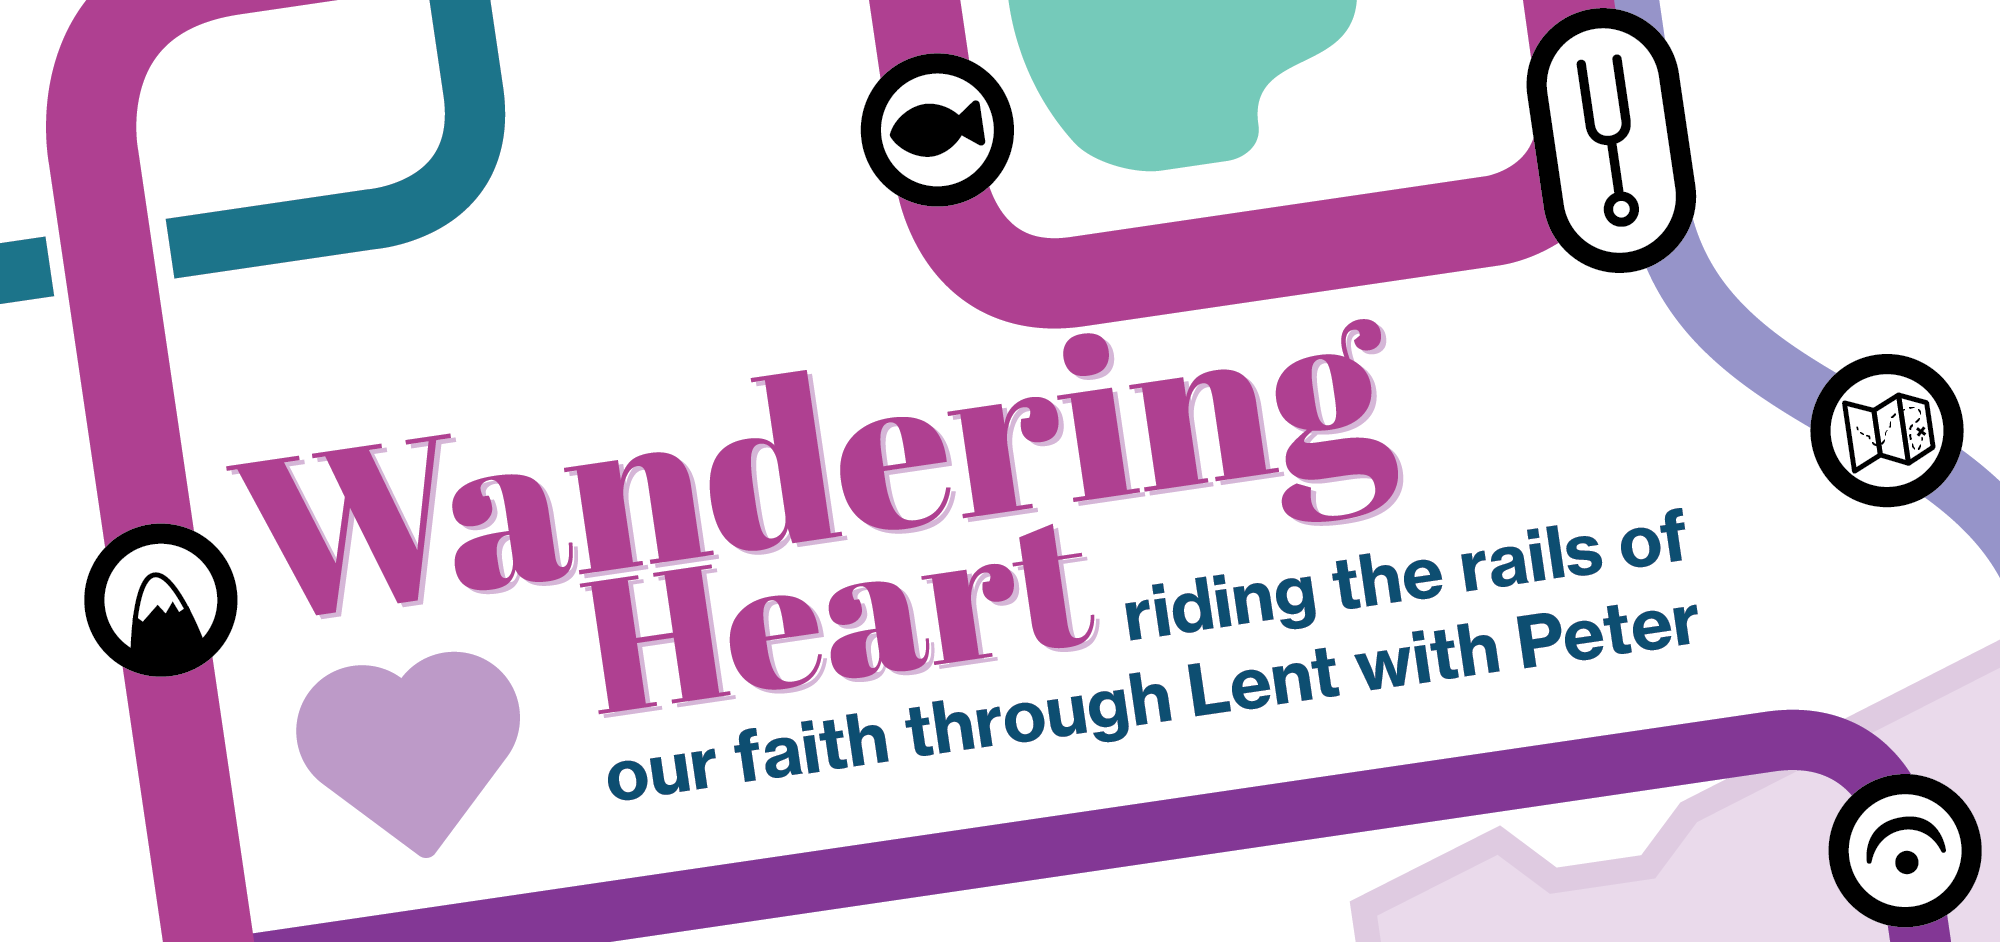 Wandering Heart: riding the rails of our faith through Lent with Peter